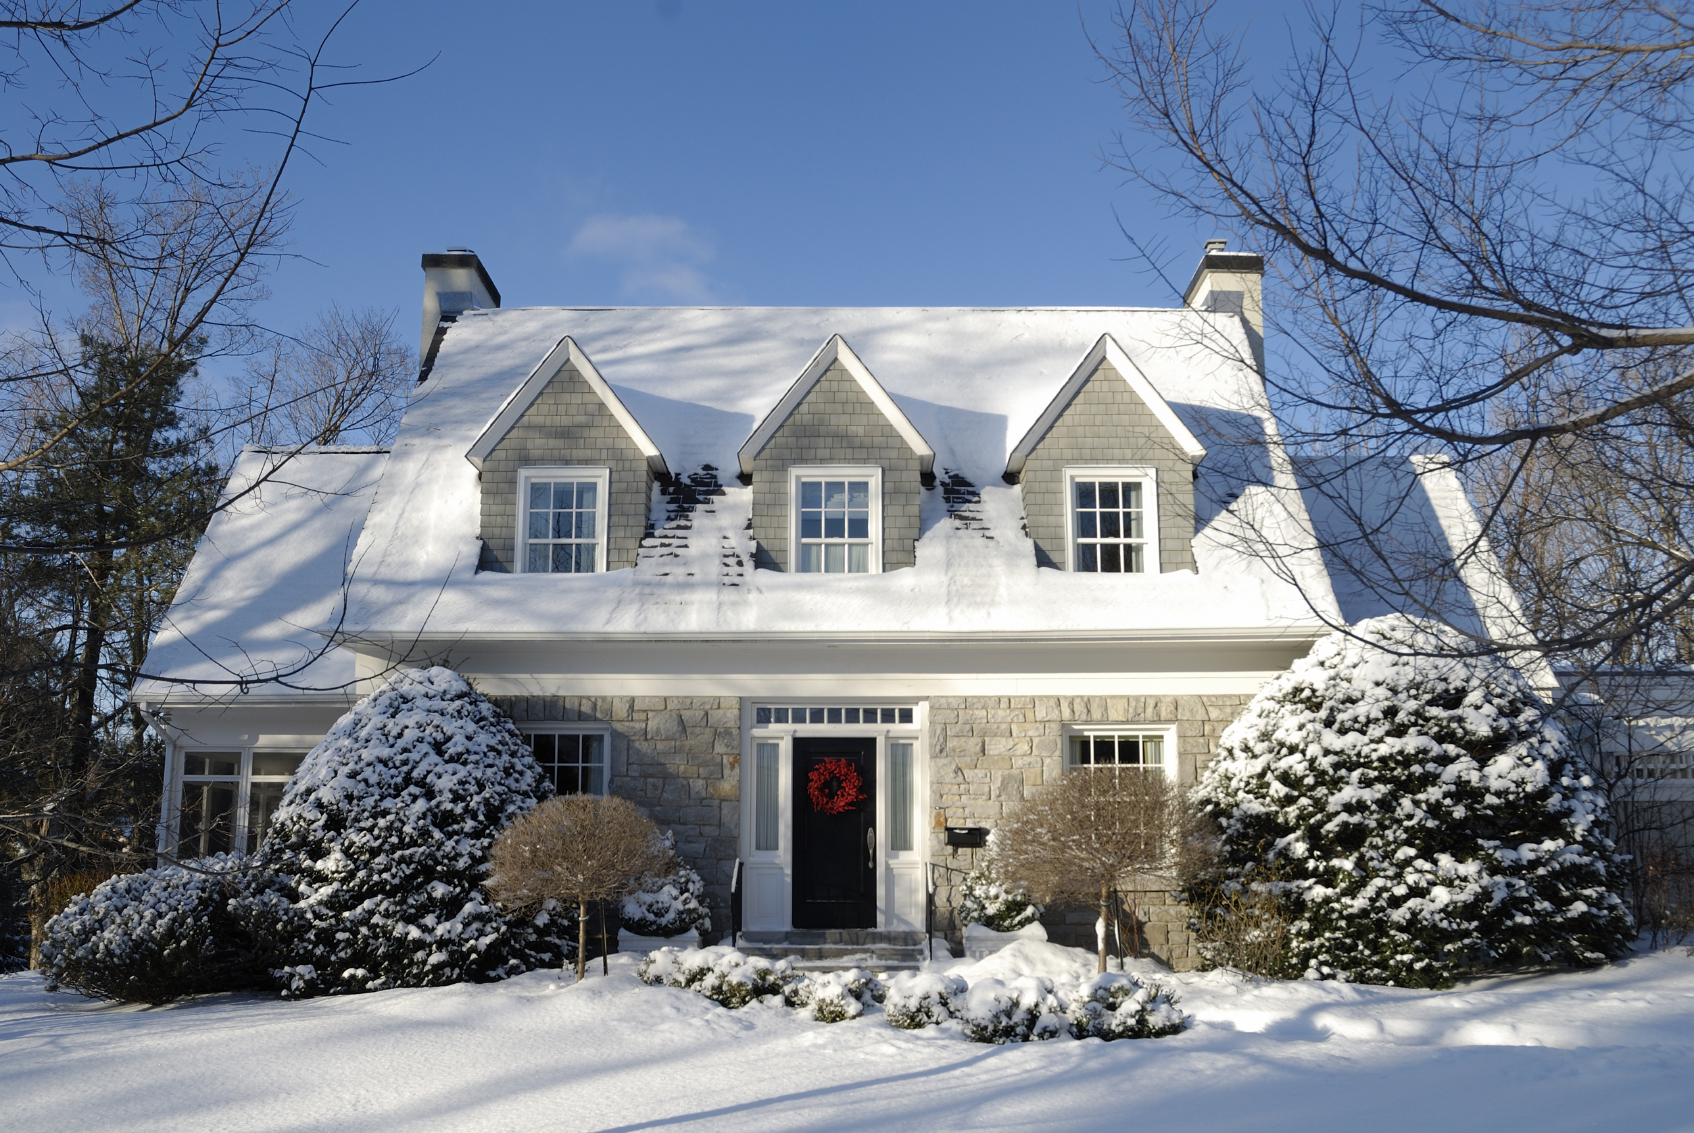 Is your home ready for the long winter months ahead?